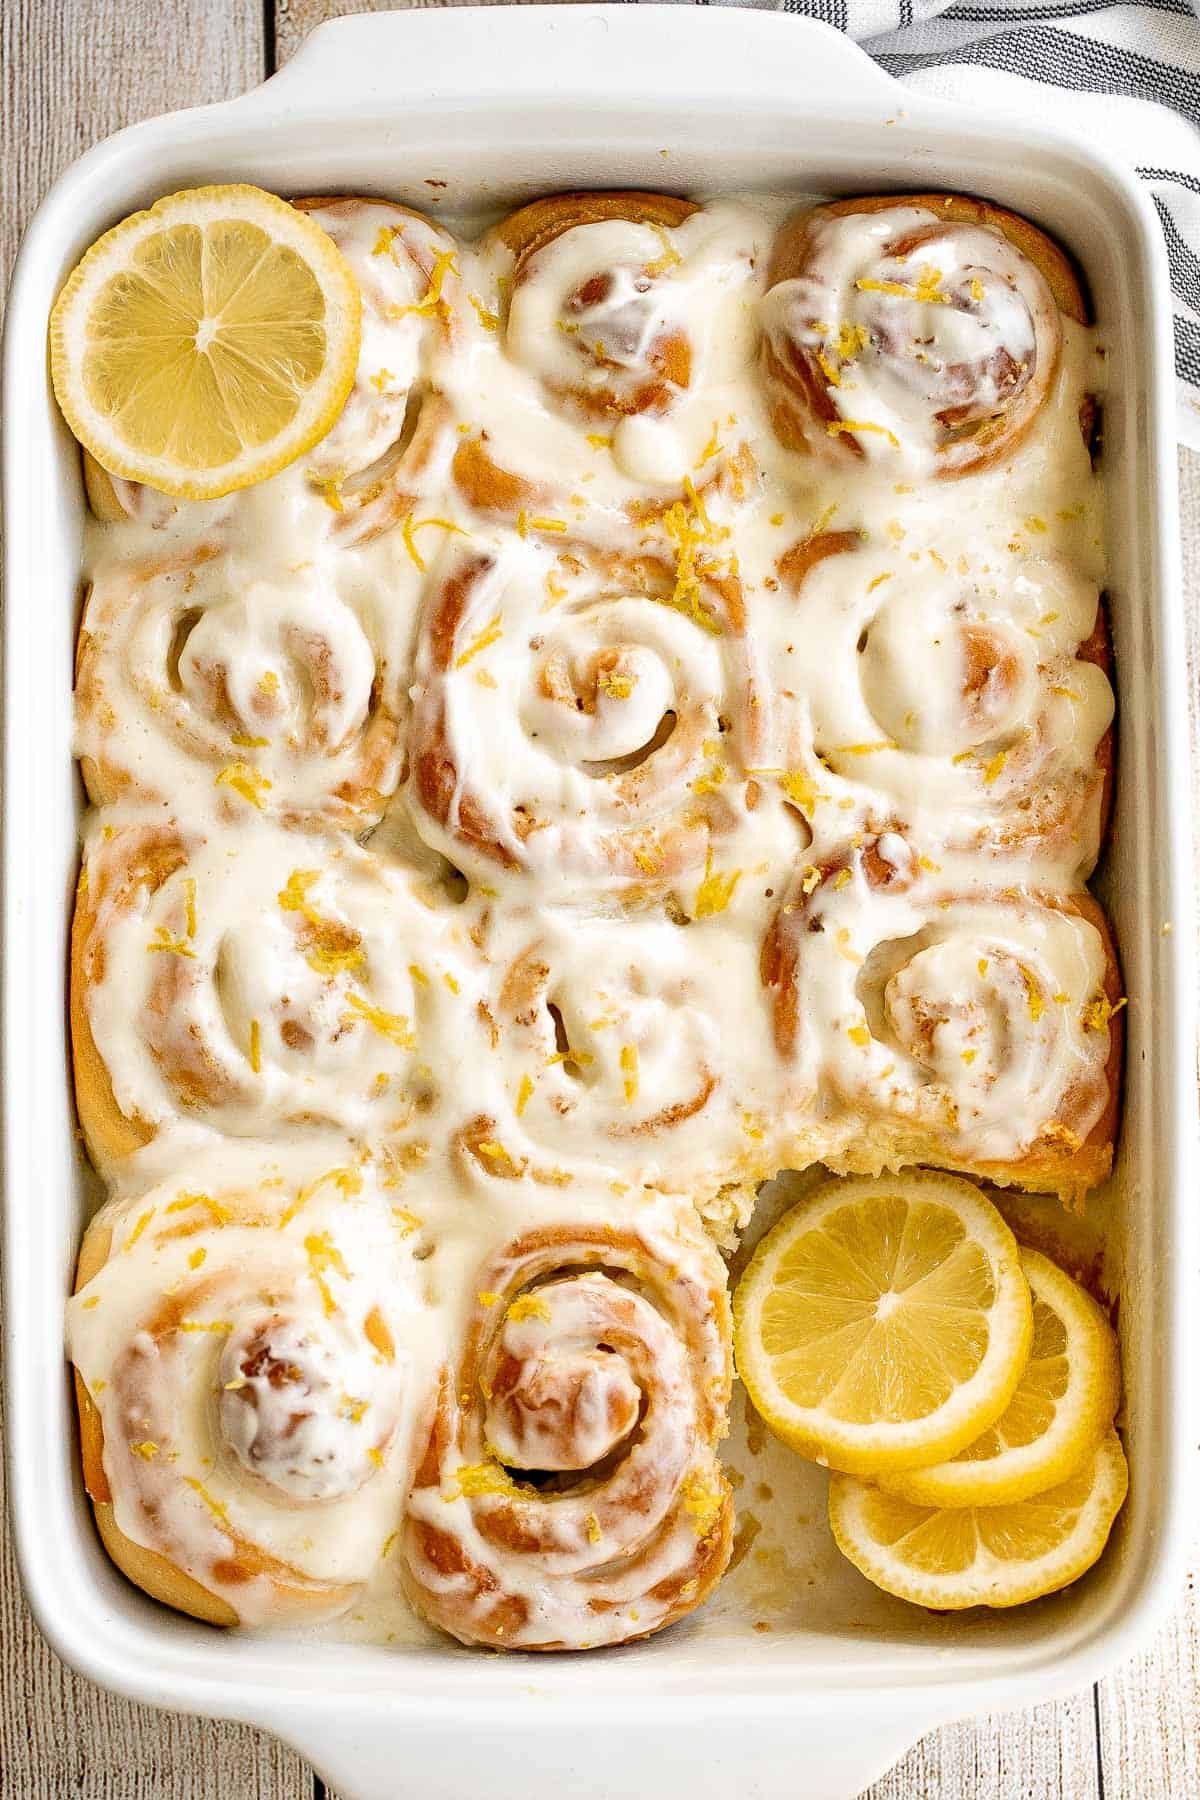 Soft and fluffy lemon sweet rolls are filled with a lemon vanilla sugar and topped with homemade lemon cream cheese icing. They're sweet, citrusy, and tart. | aheadofthyme.com